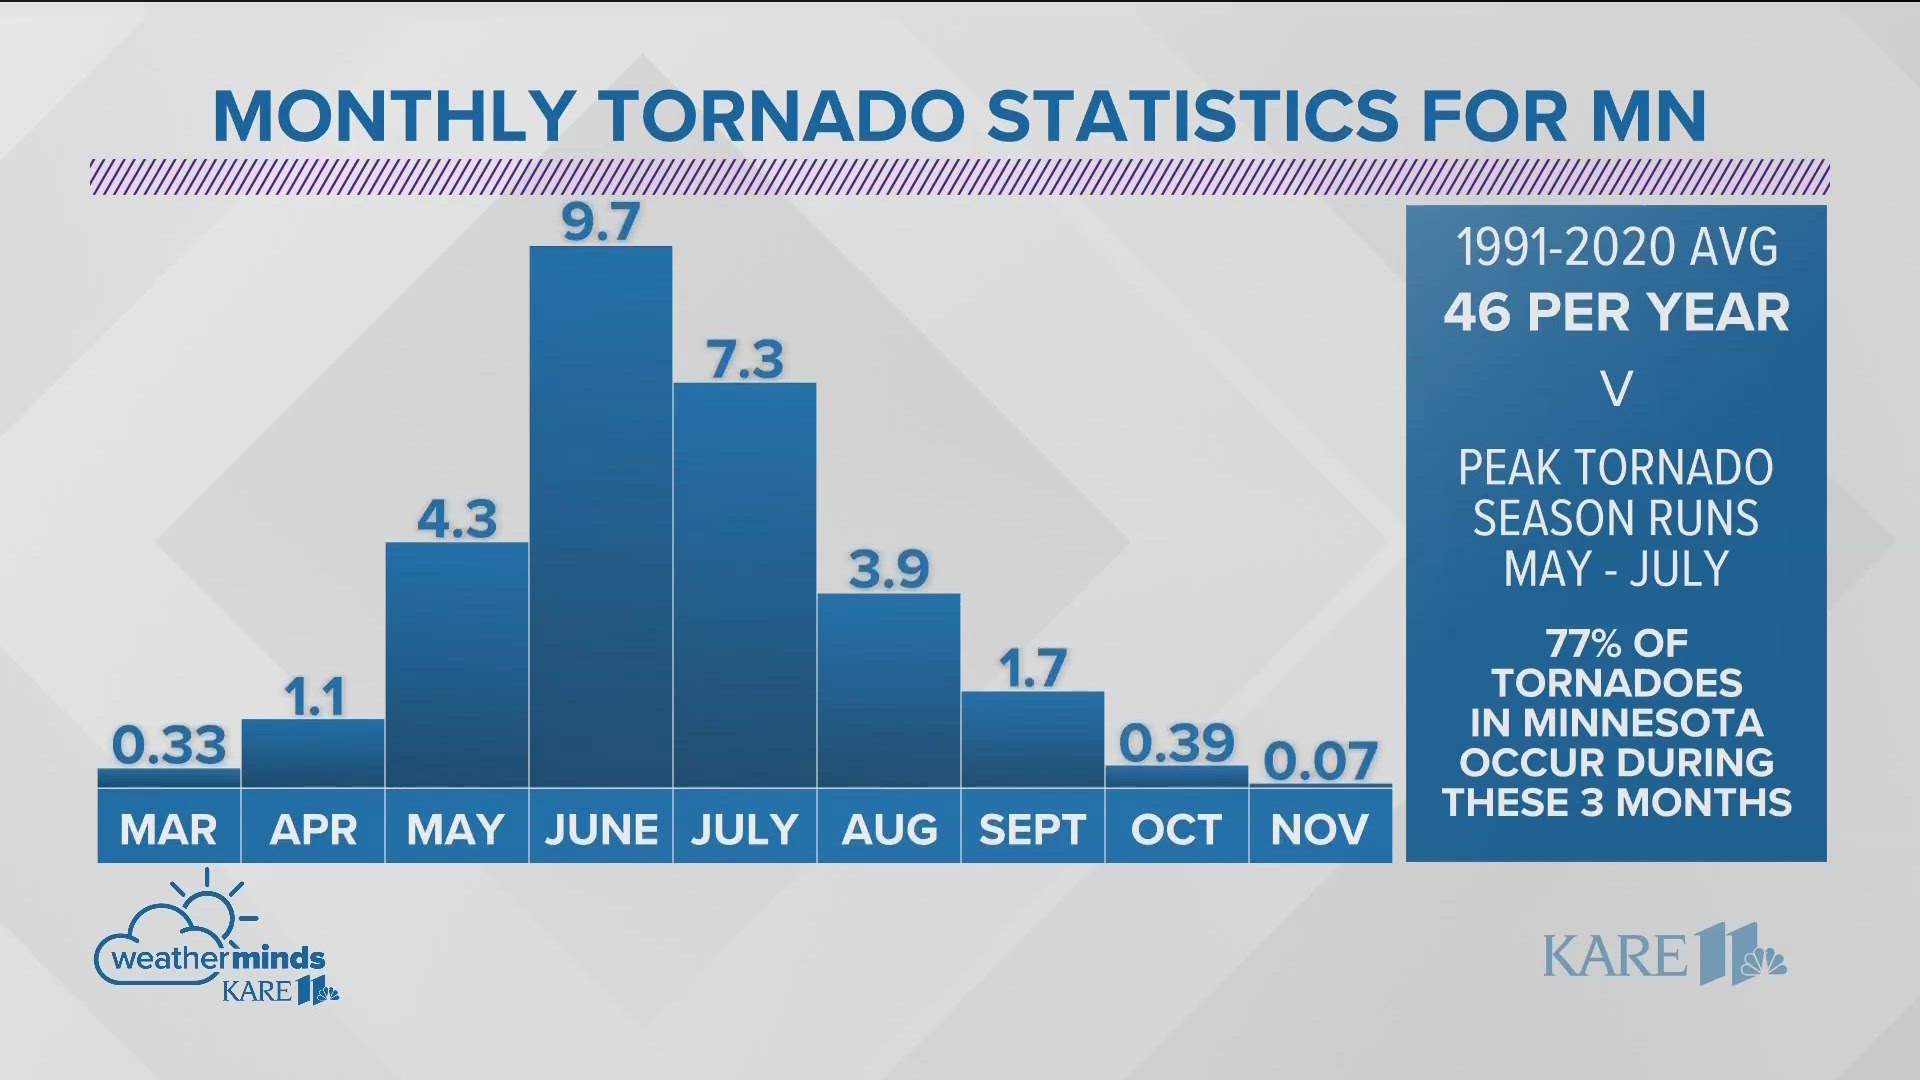 Tornado season is typically late spring and early summer in Minnesota, though we've seen tornadoes at other times of the year as well.